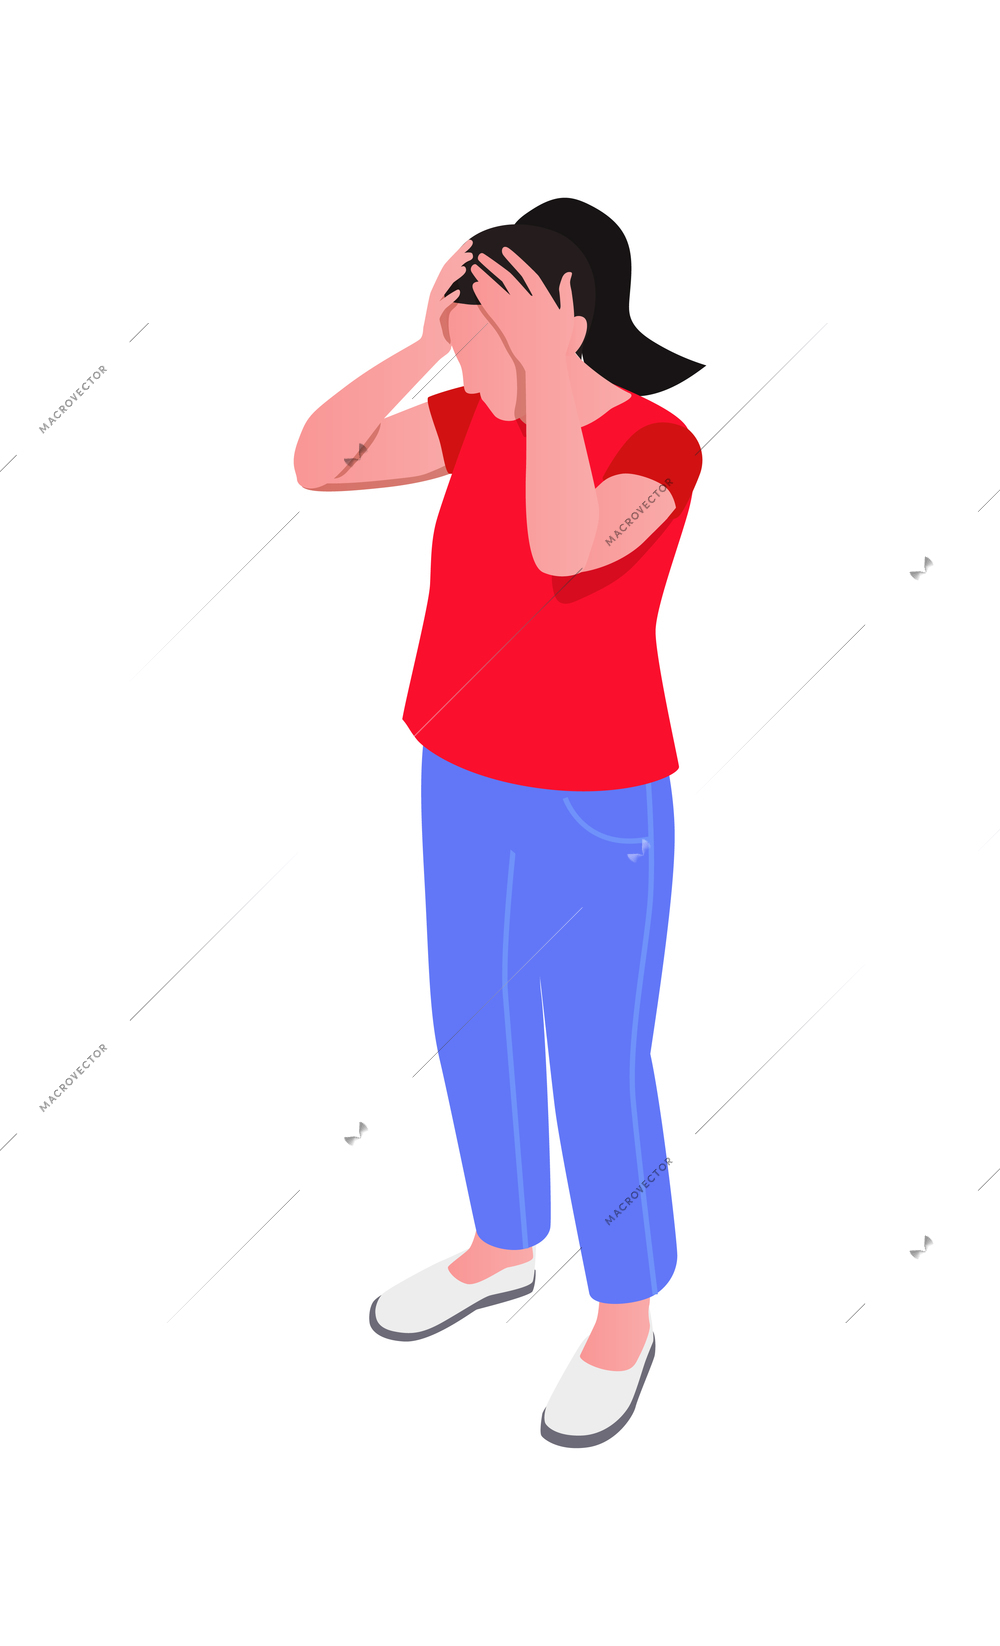 Worried woman with accident and insurance symbols isometric on blank background vector illustration